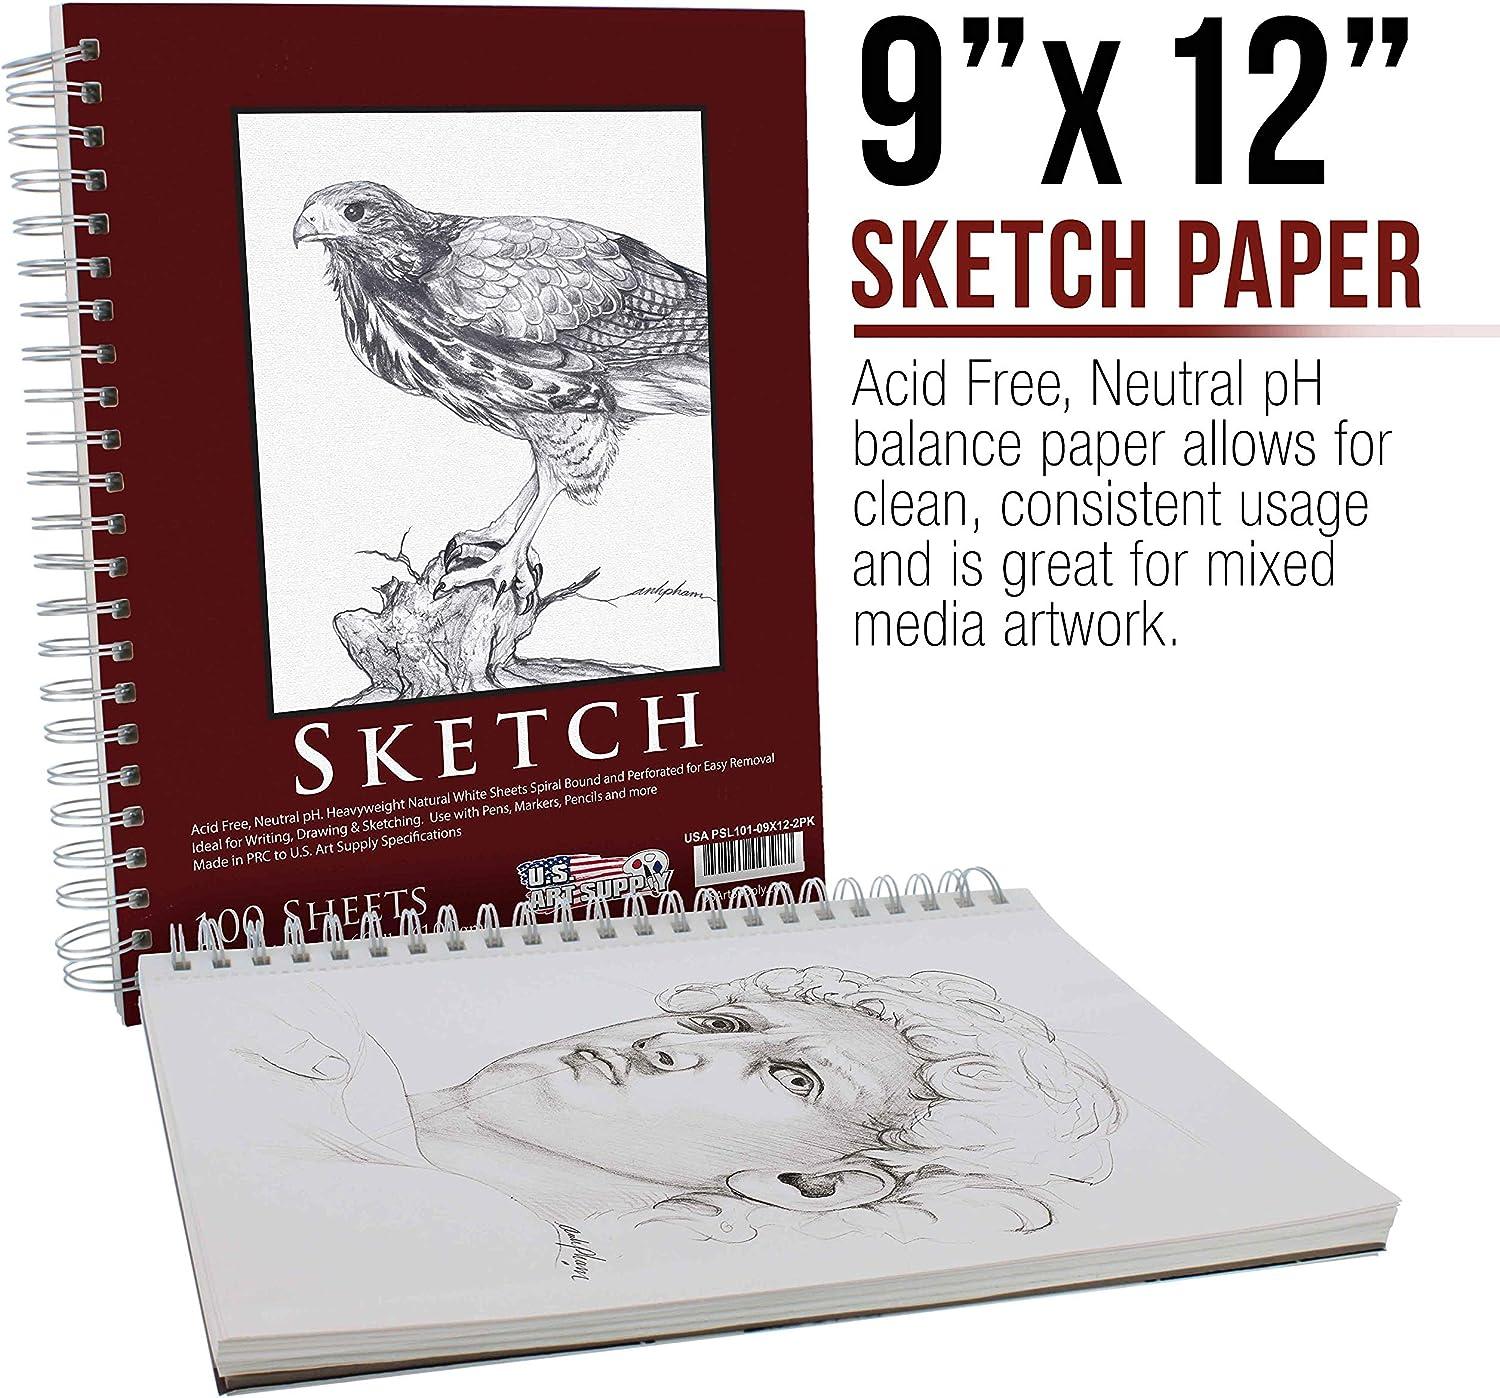 Nature Drawing and Journaling Book and Supplies Bundle